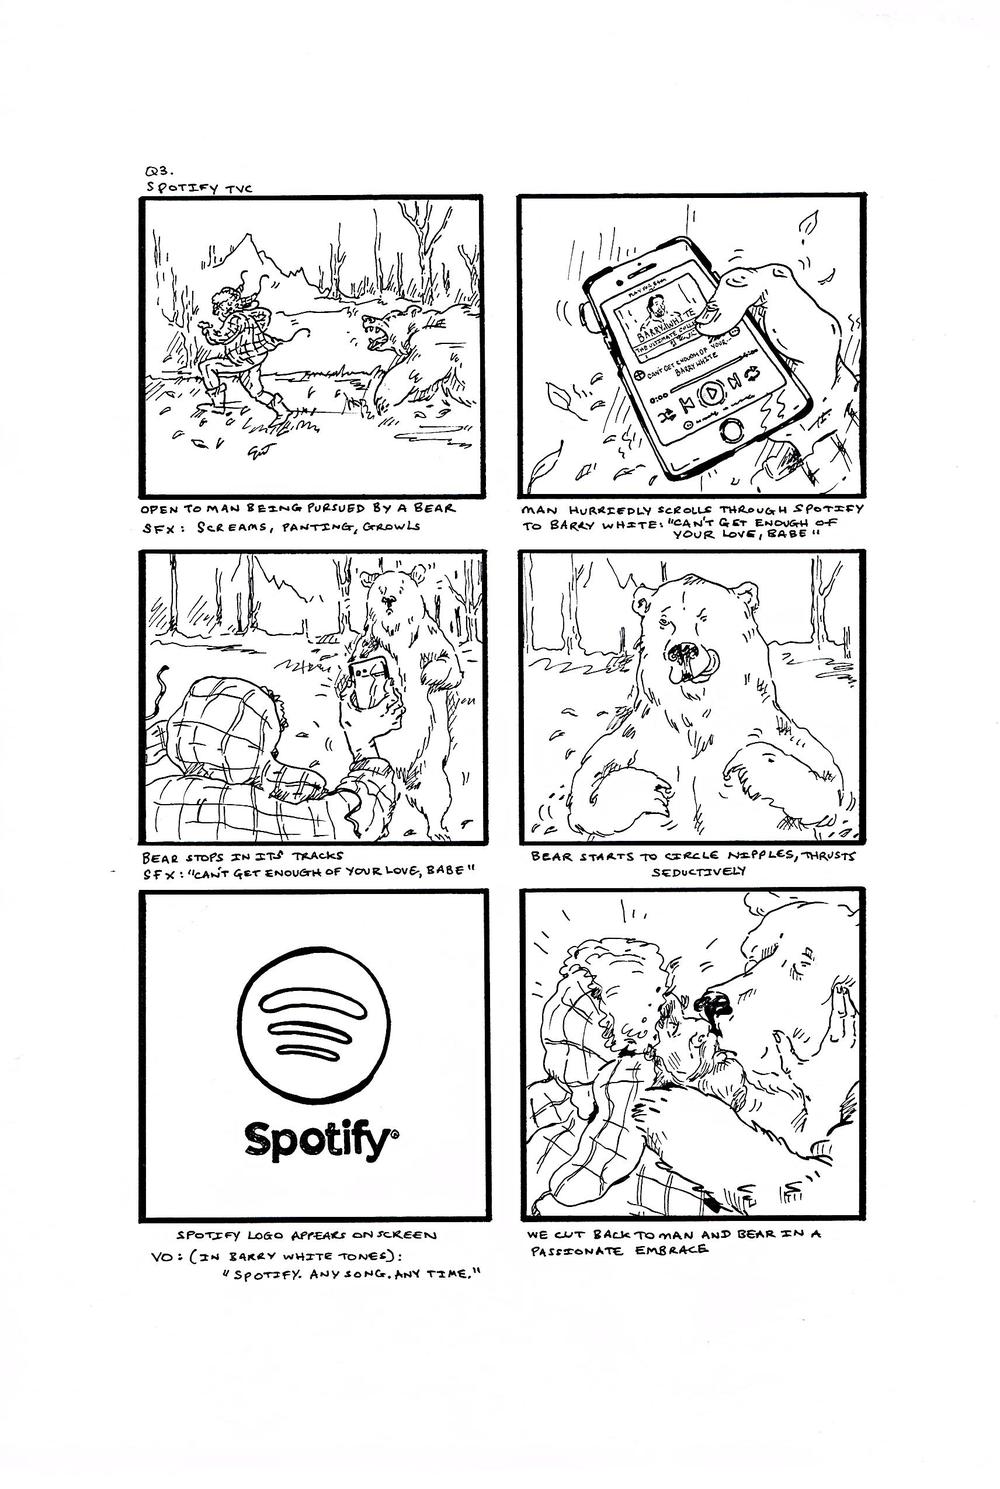  I decided to give the Spotify SMP: 'Listen to music anytime, anywhere' a bit of a kick...queue 'Sexual Bear'.&nbsp; 